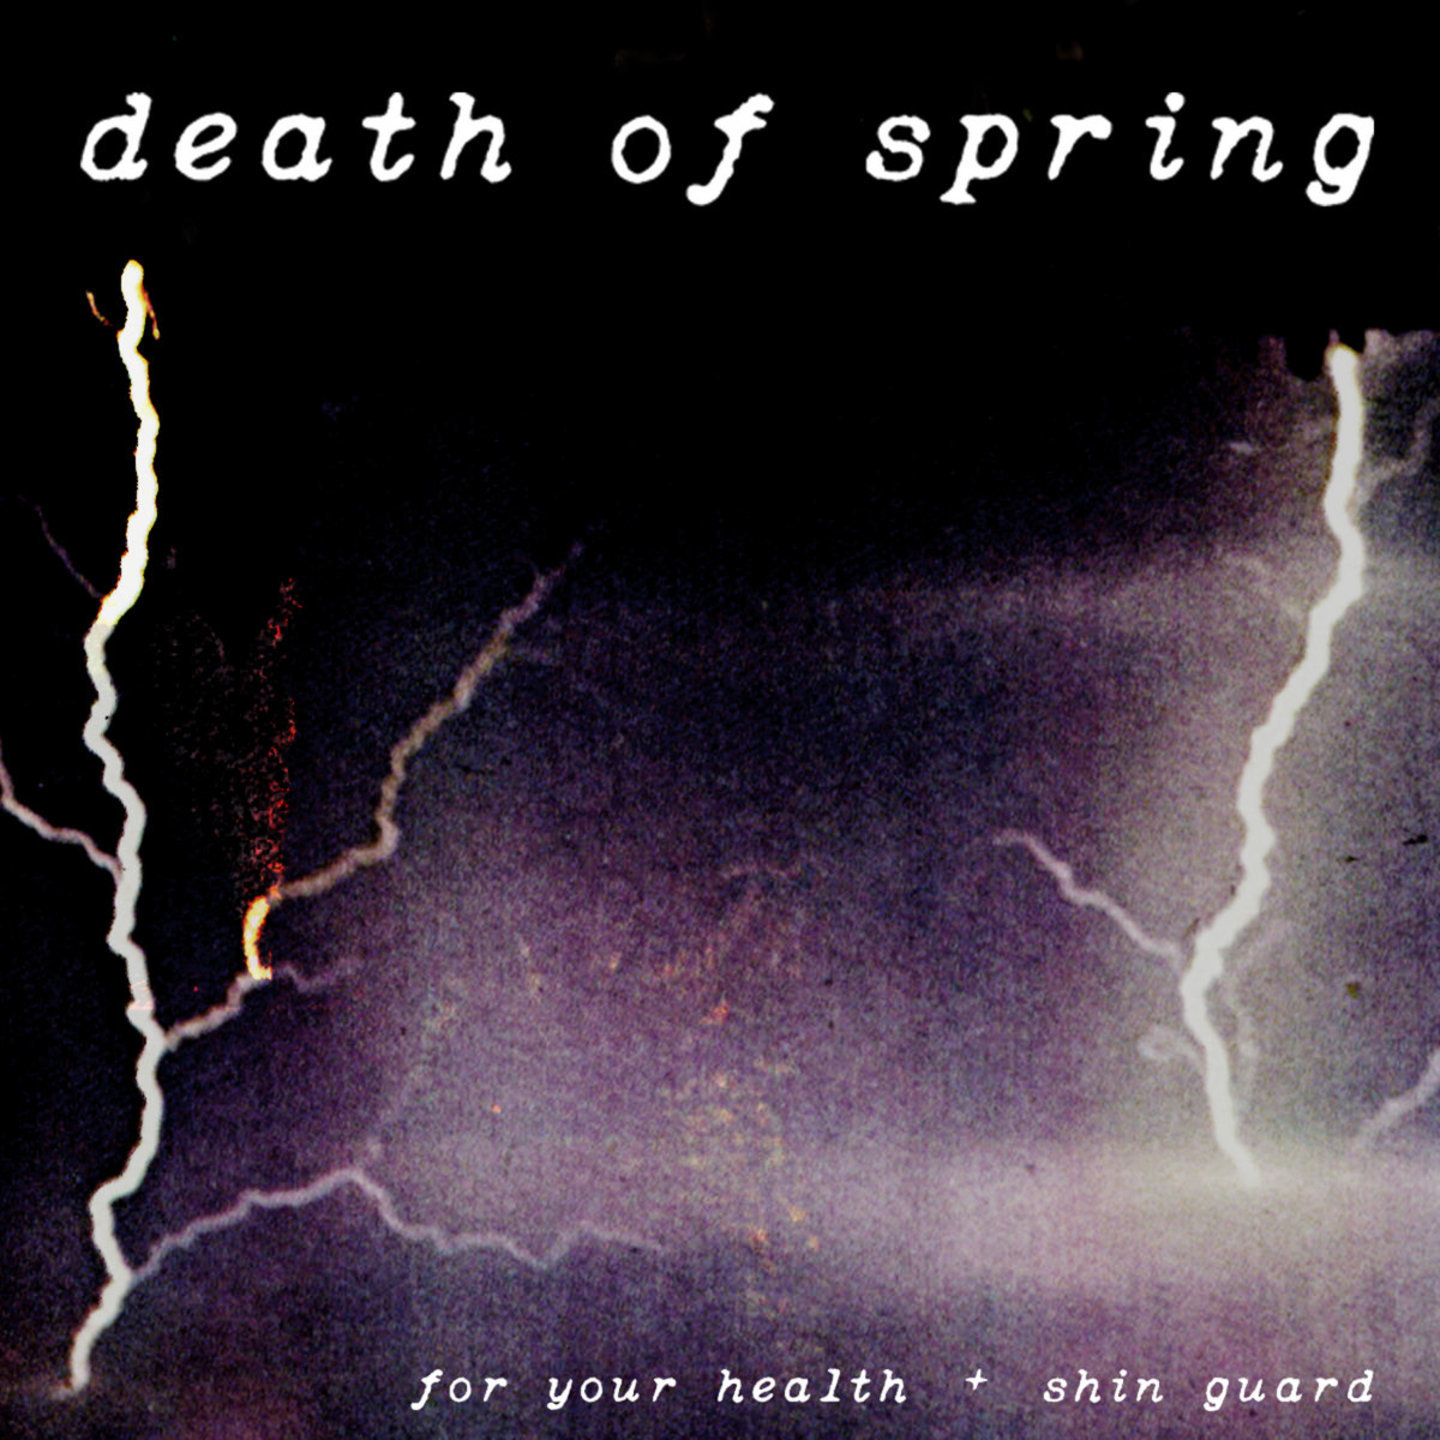 FOR YOUR HEALTH  SHIN GUARD - Death Of Spring Split LP